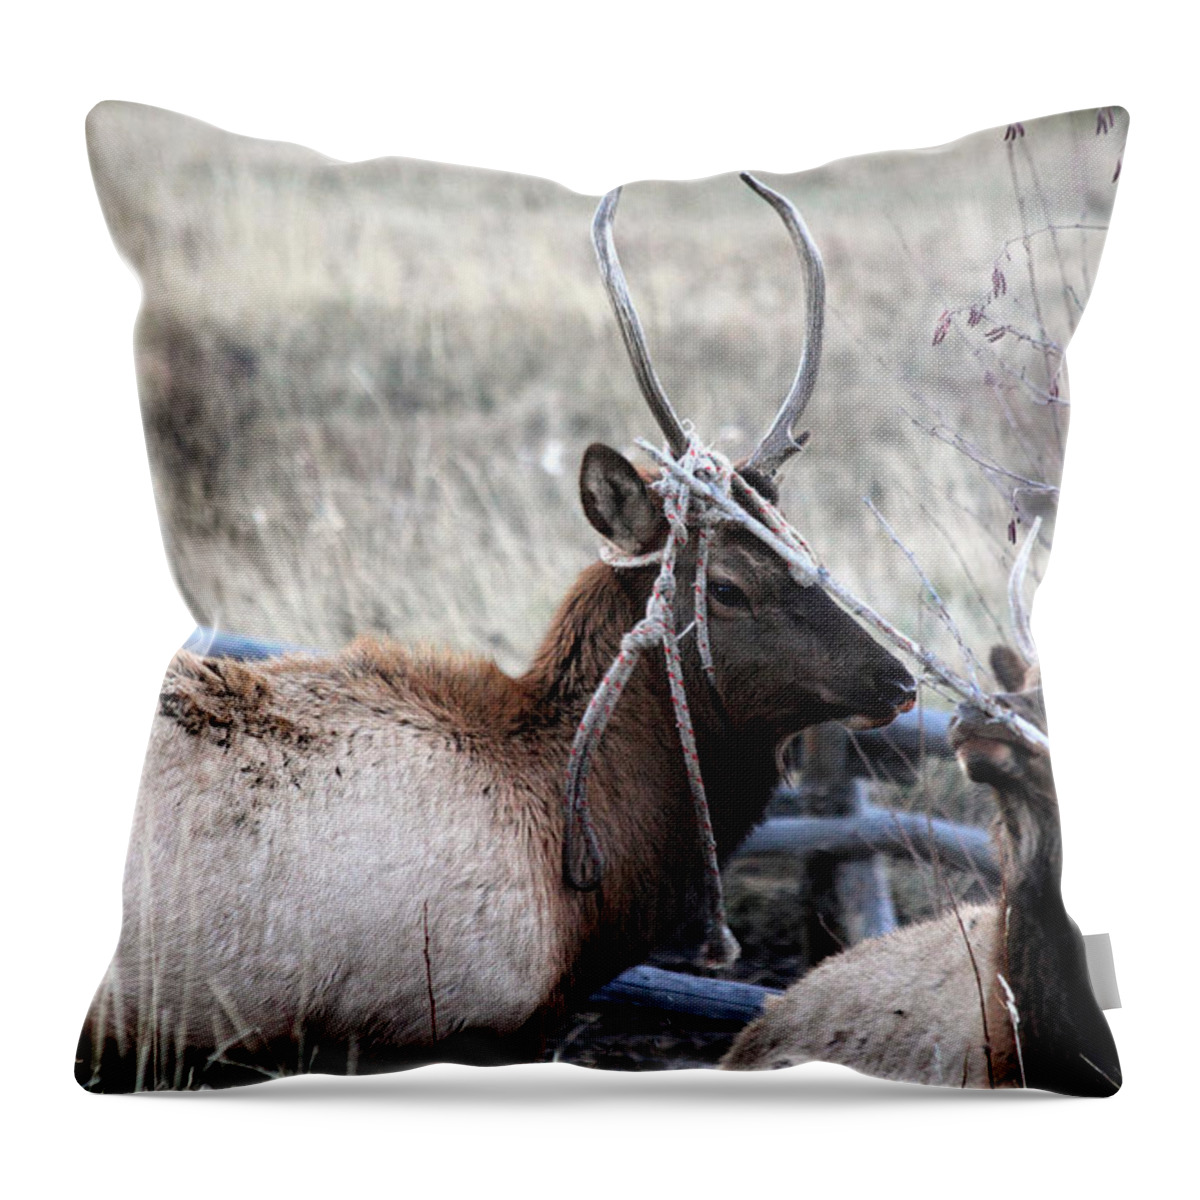 Entangled Throw Pillow featuring the photograph Entangled by Shane Bechler